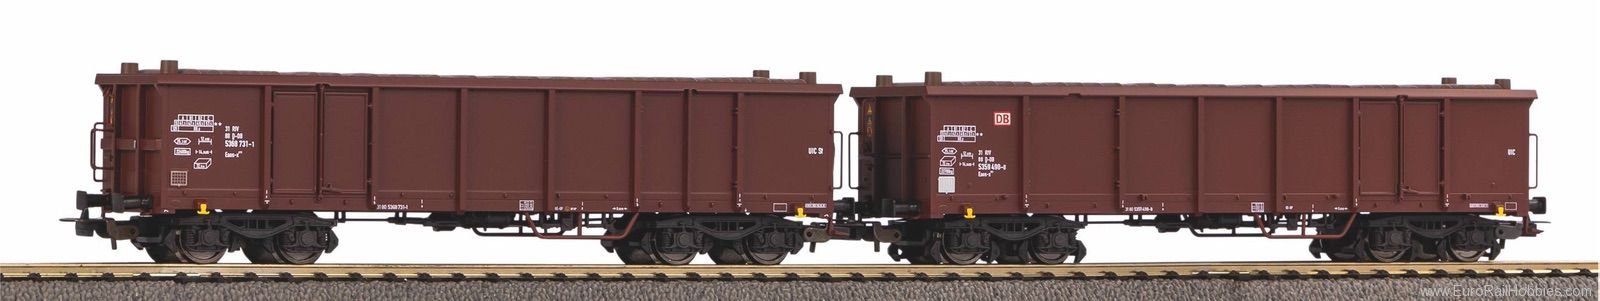 Piko 58235 Set of 2 open freight cars Eaos DB AG VI with